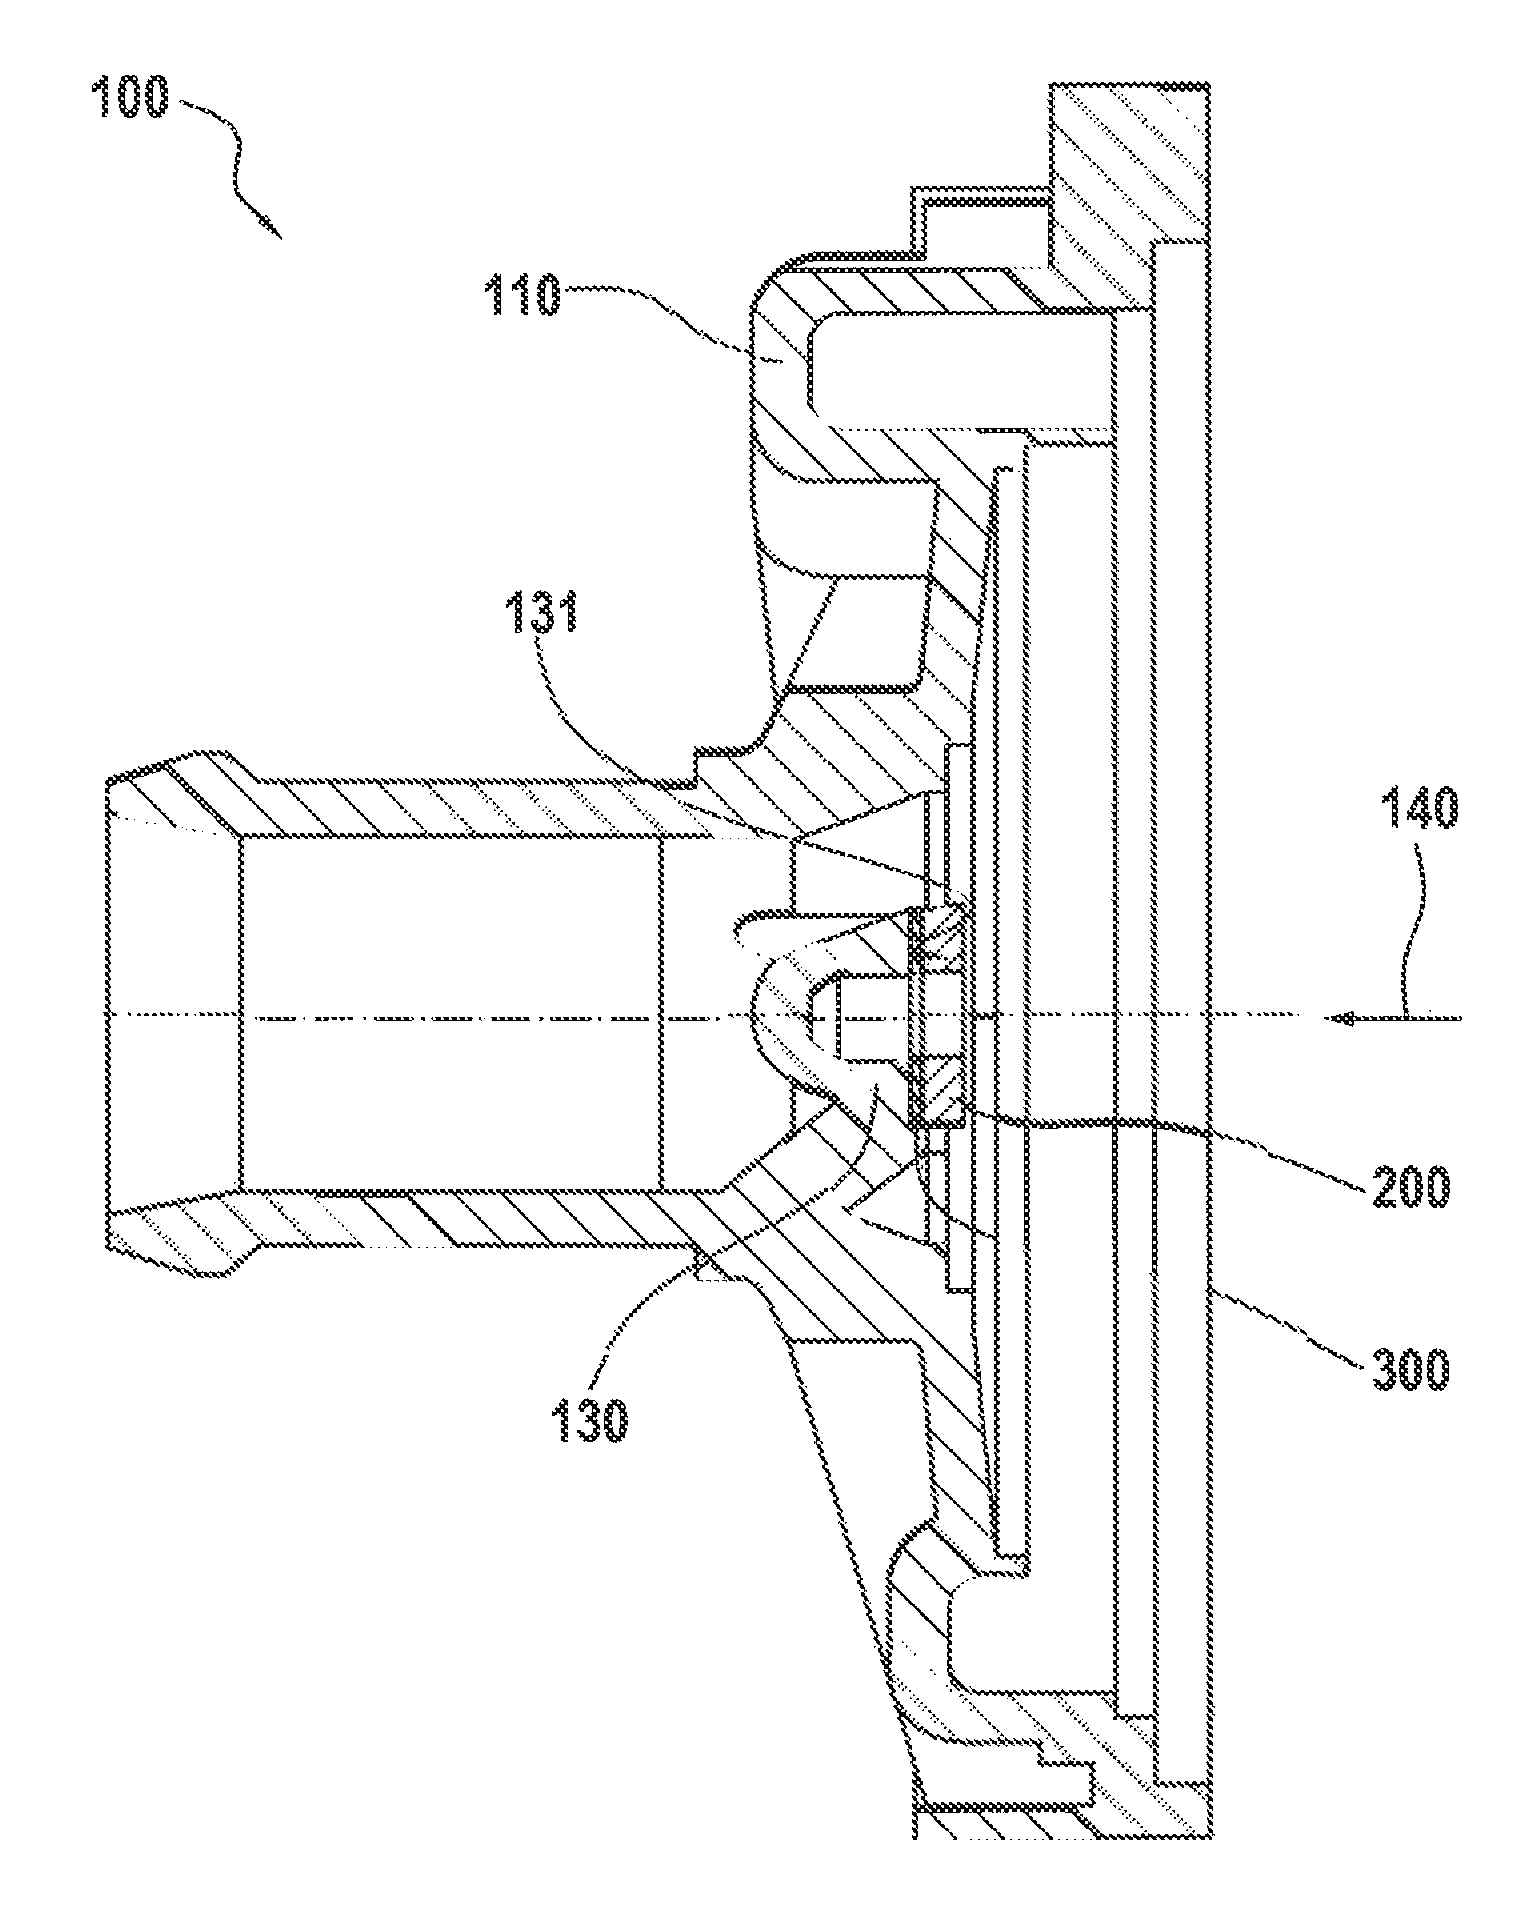 Liquid pump with axial thrust washer